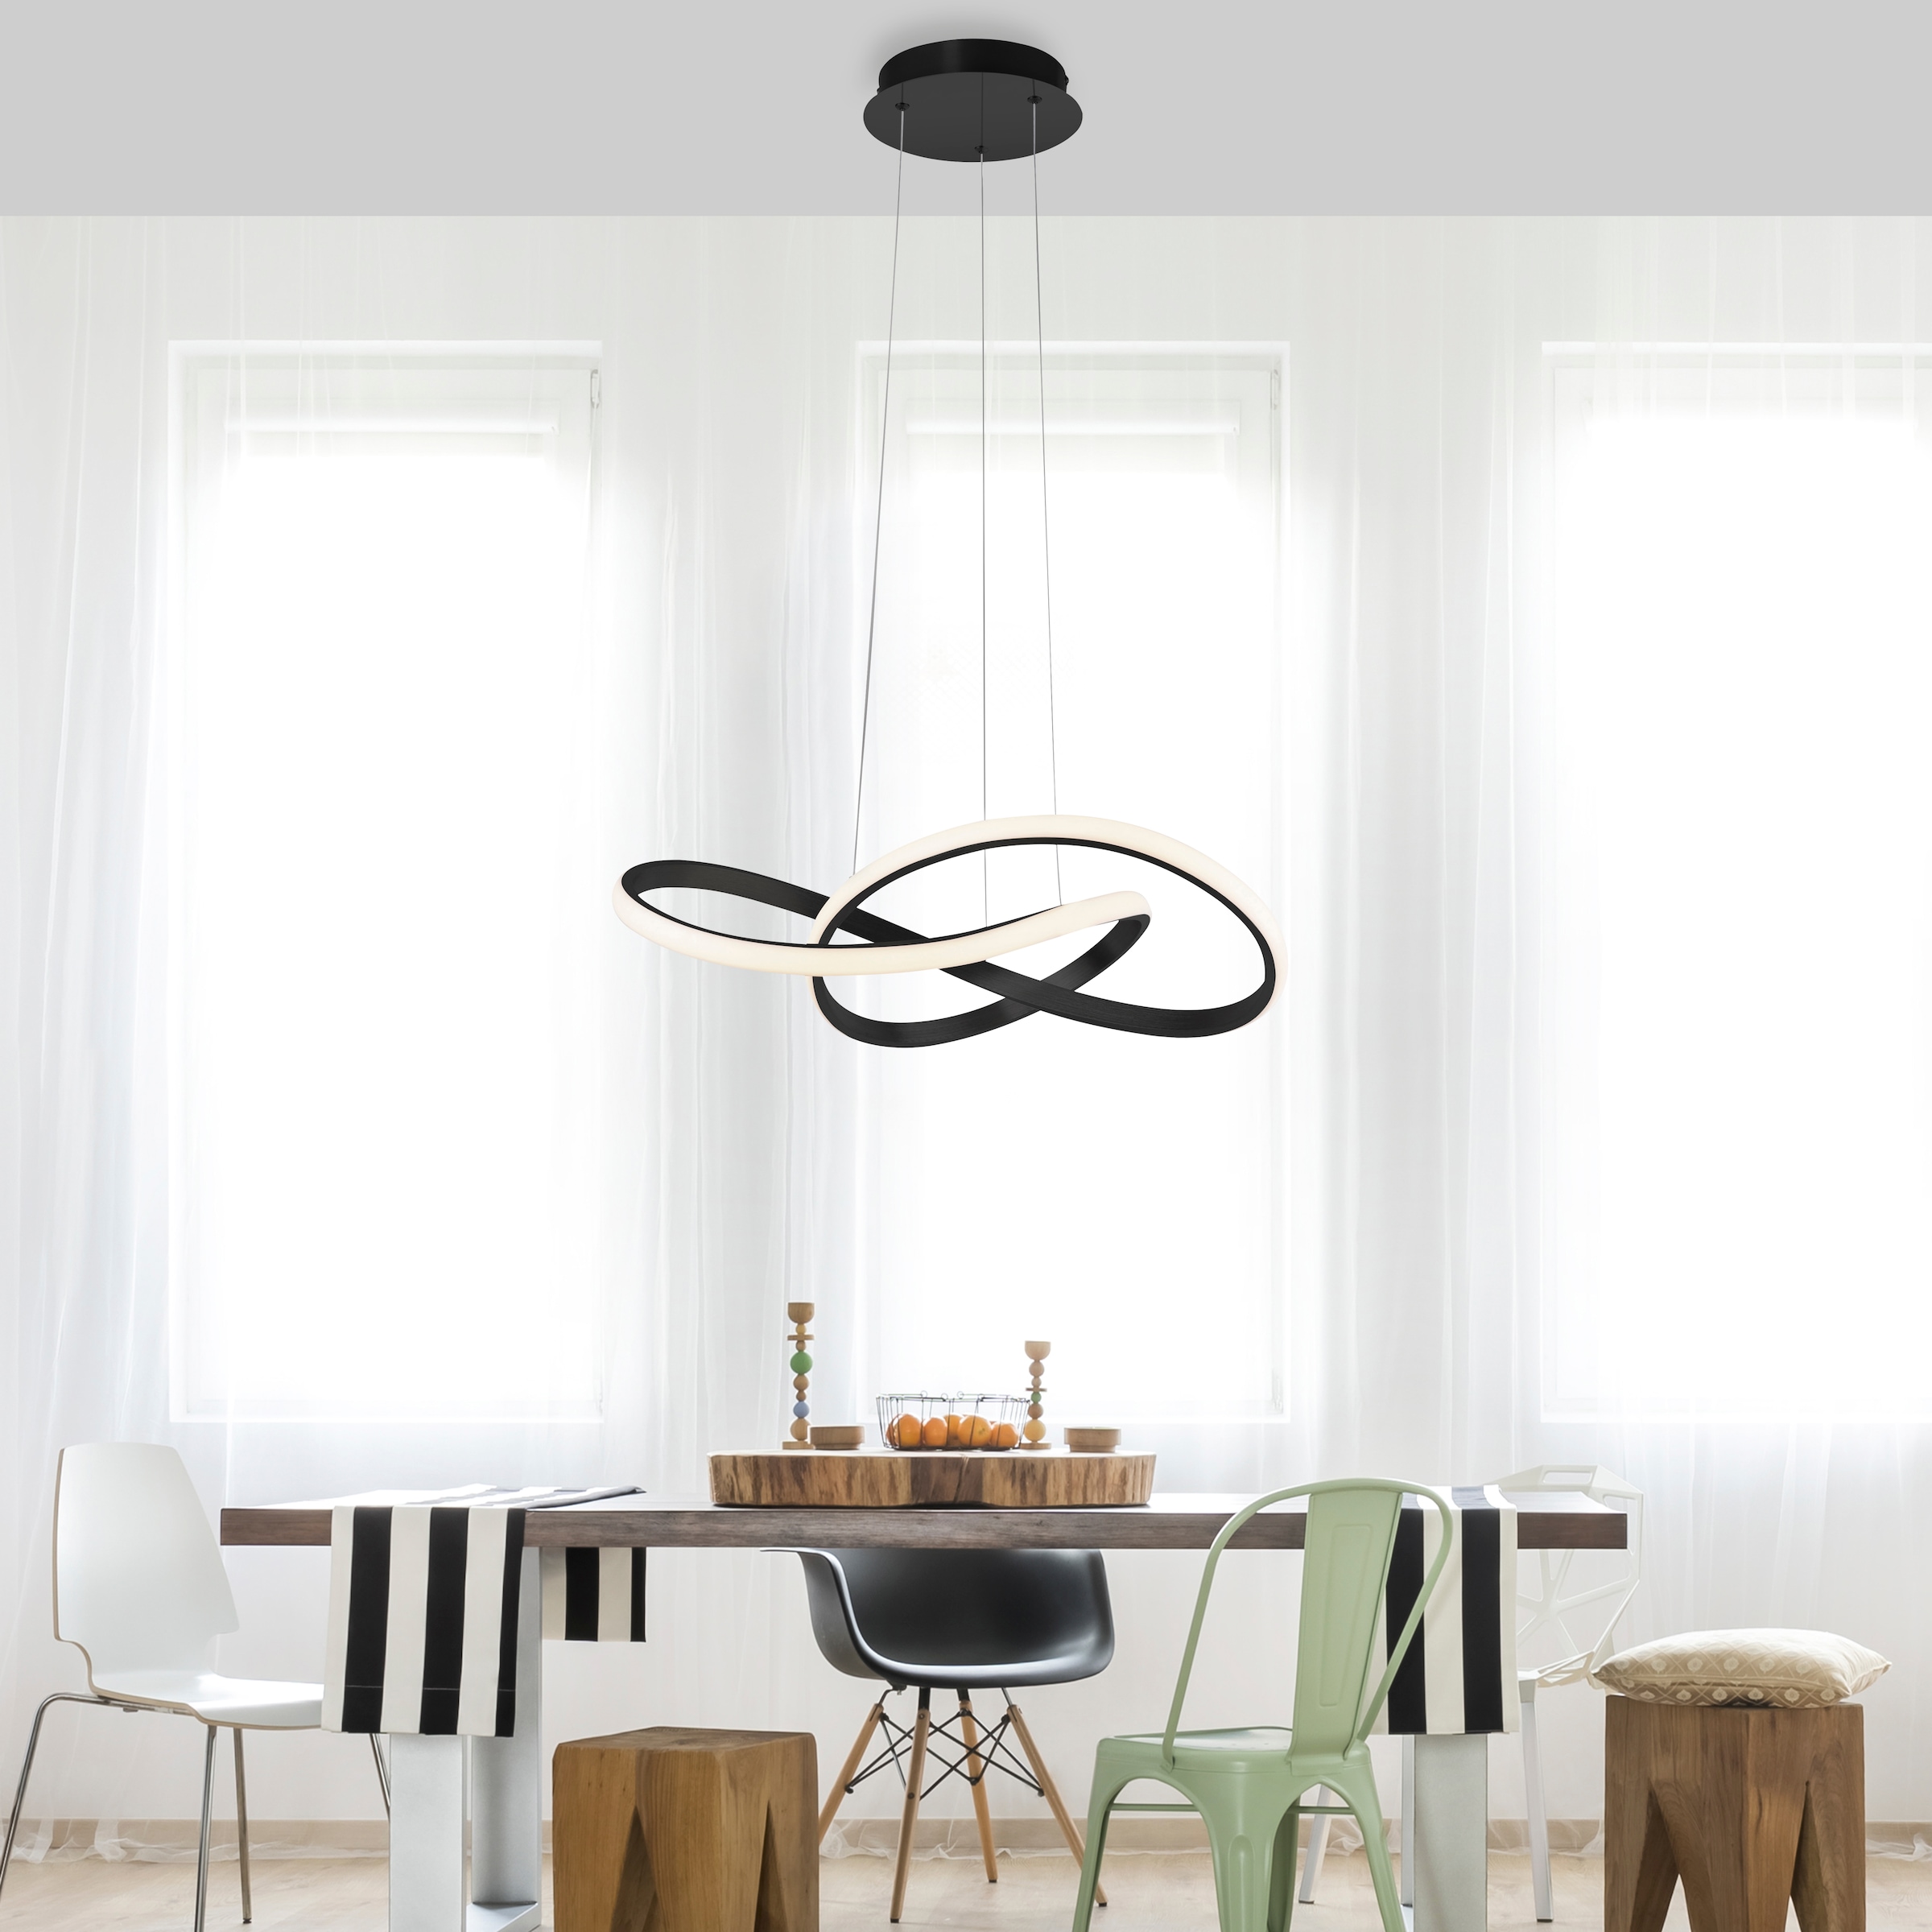 Switchmo dimmbar, OTTO »MARIA«, flammig-flammig, LIGHT 1 JUST Pendelleuchte LED, online bei